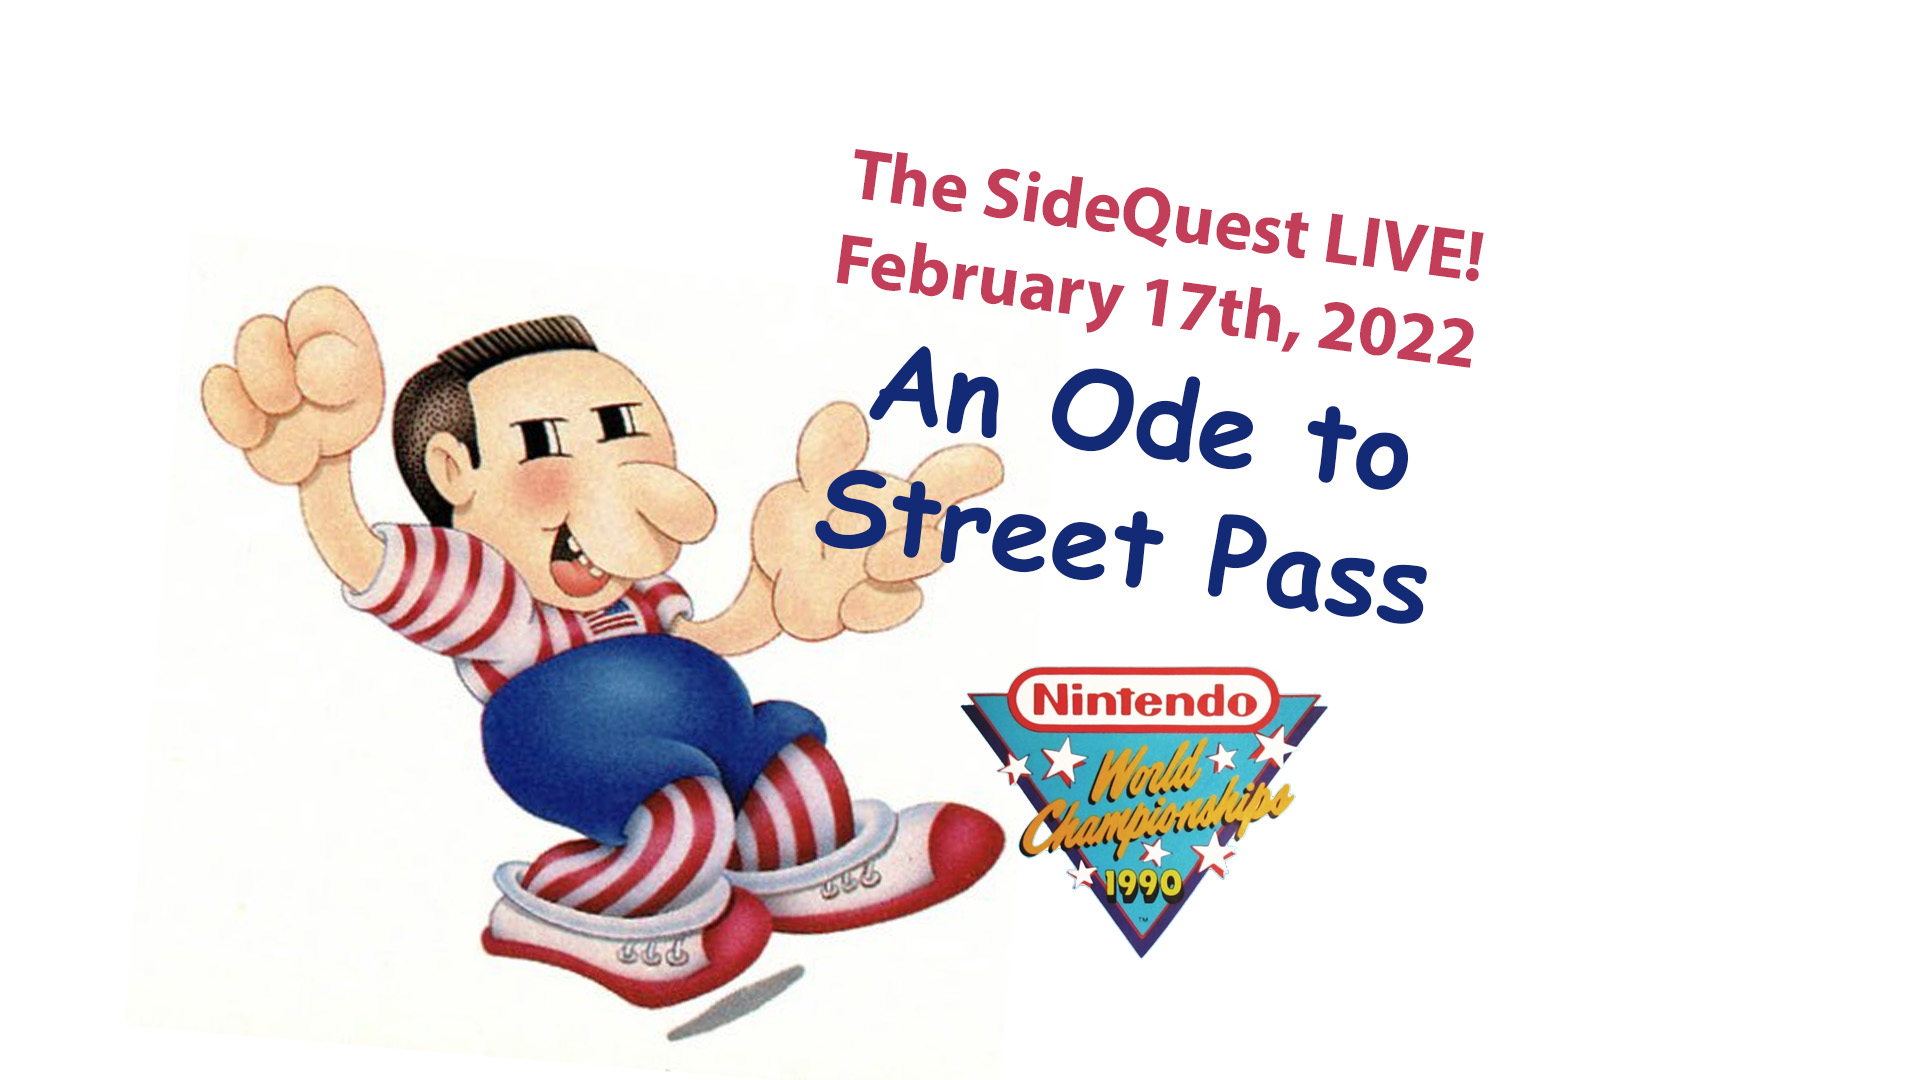 The SideQuest LIVE! February 17th, 2022: An Ode to Street Pass